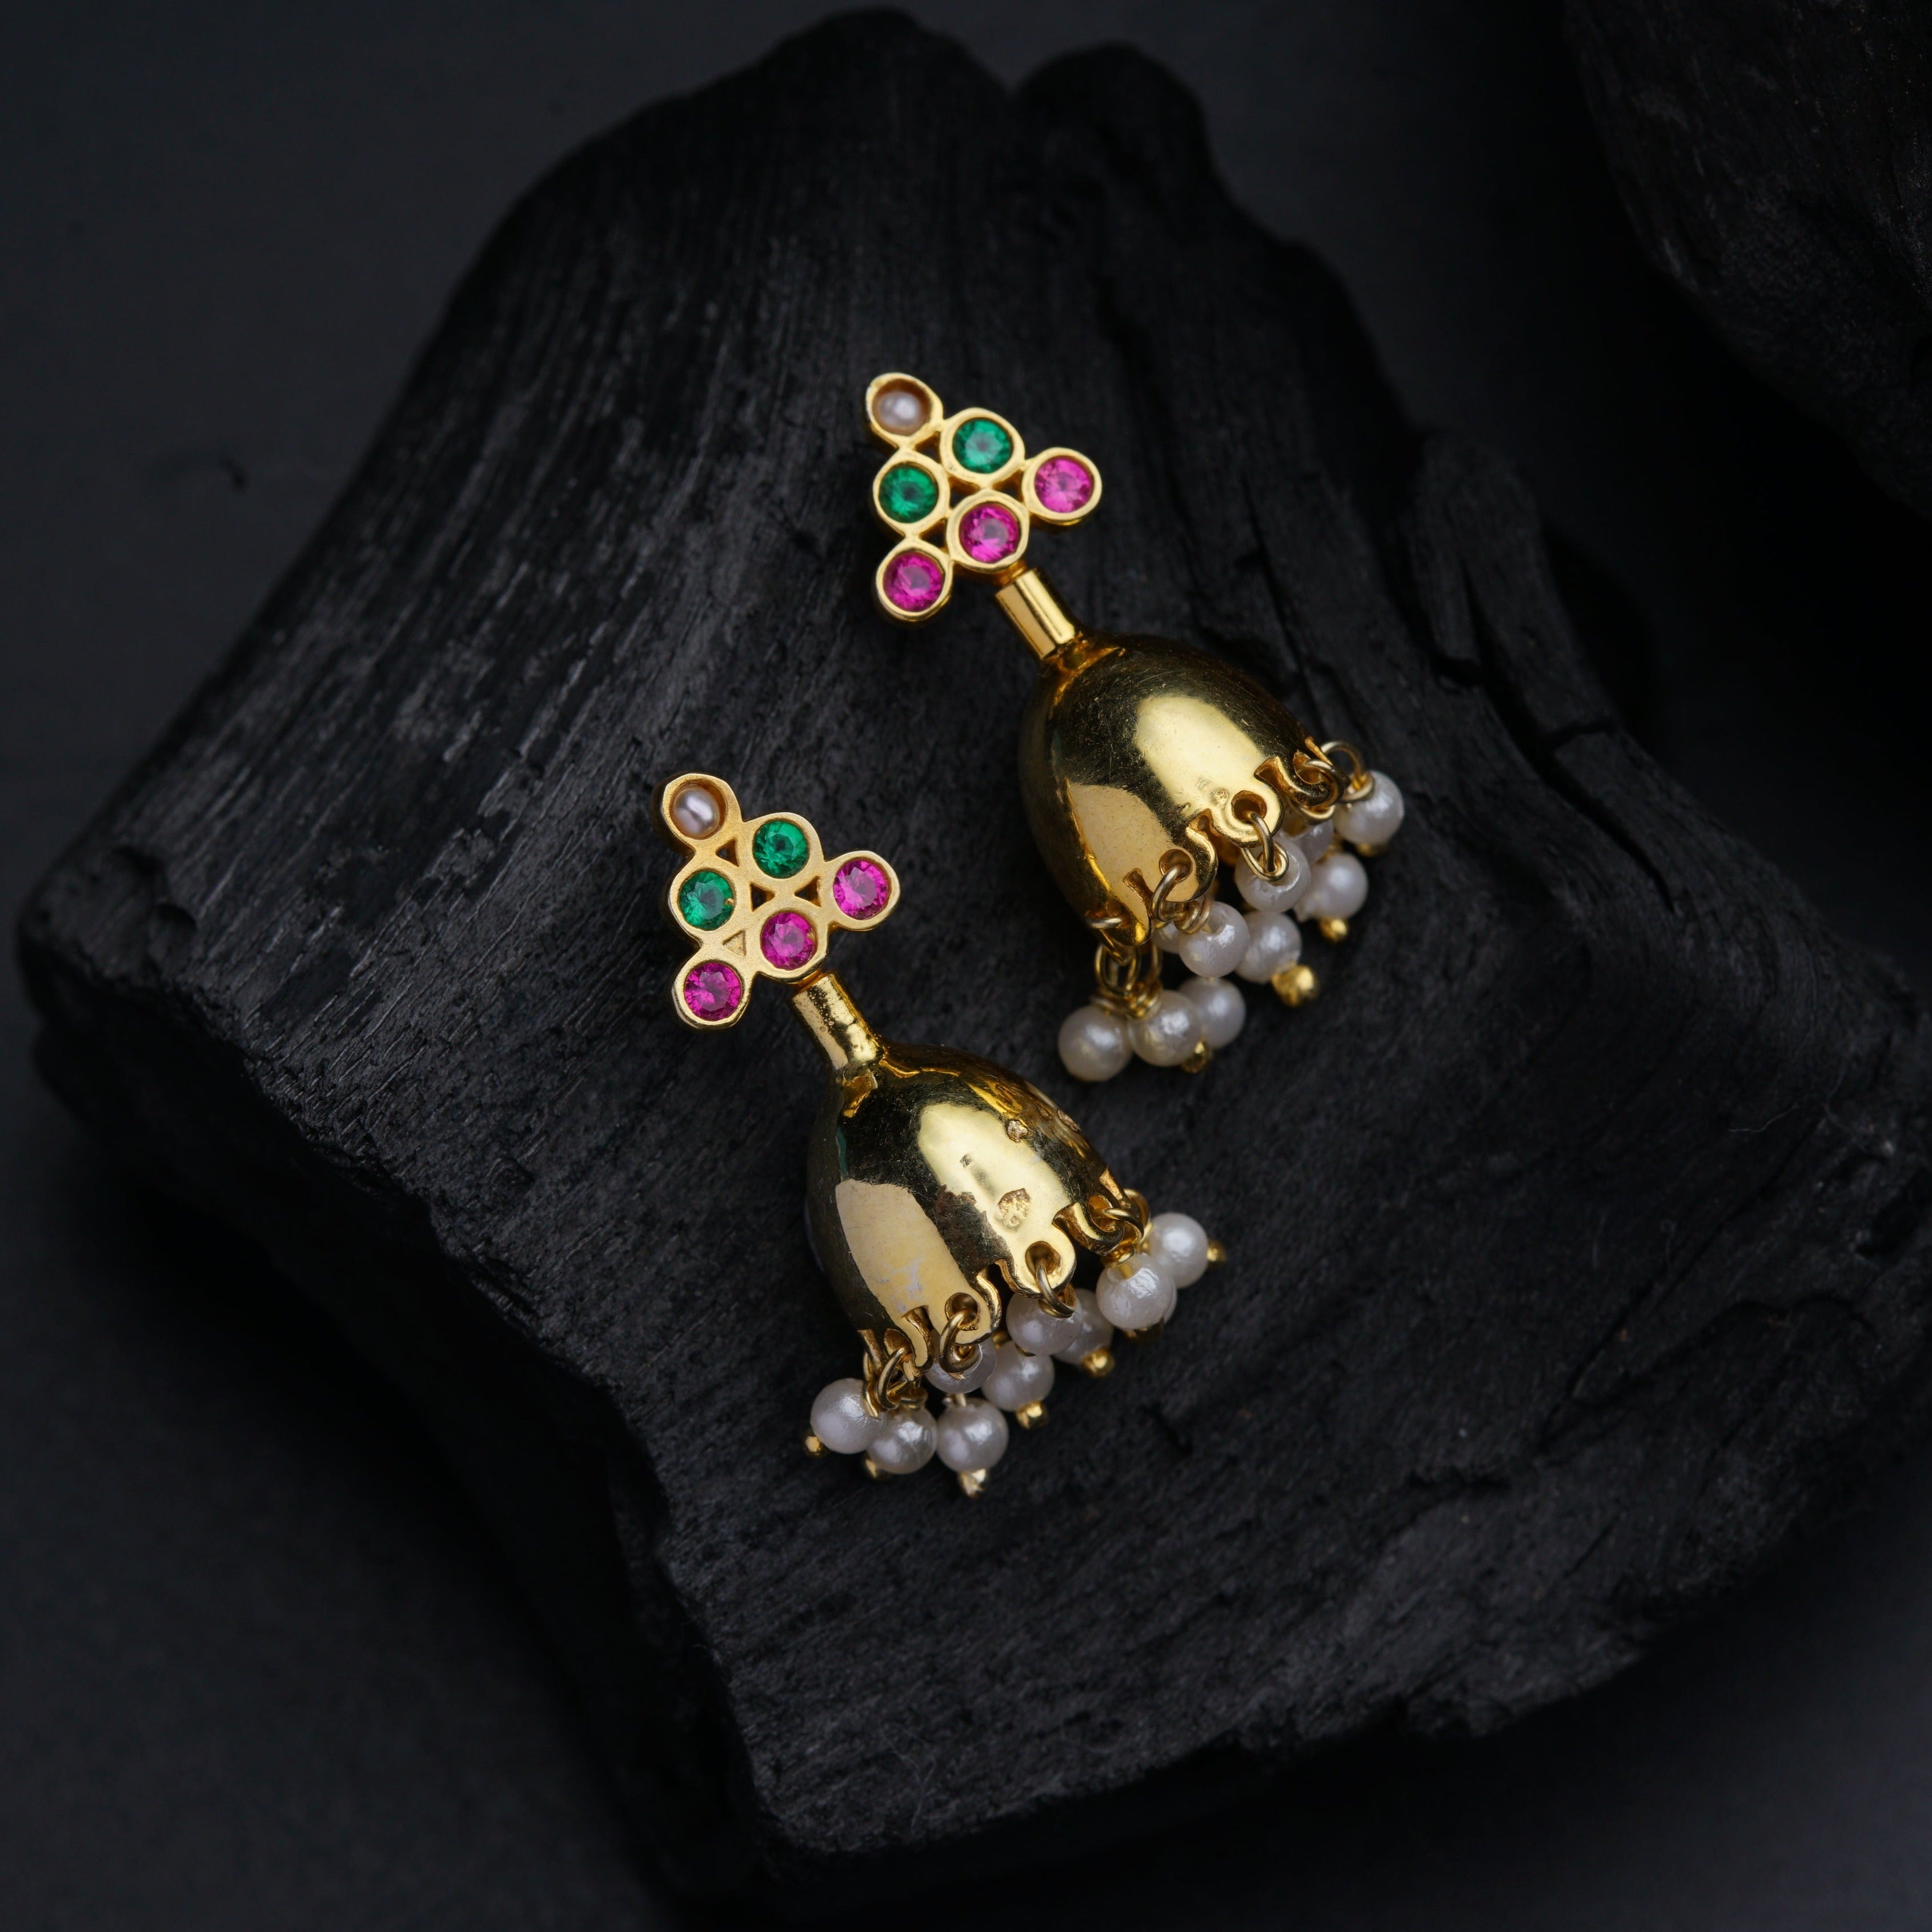 a pair of gold bells with colorful stones